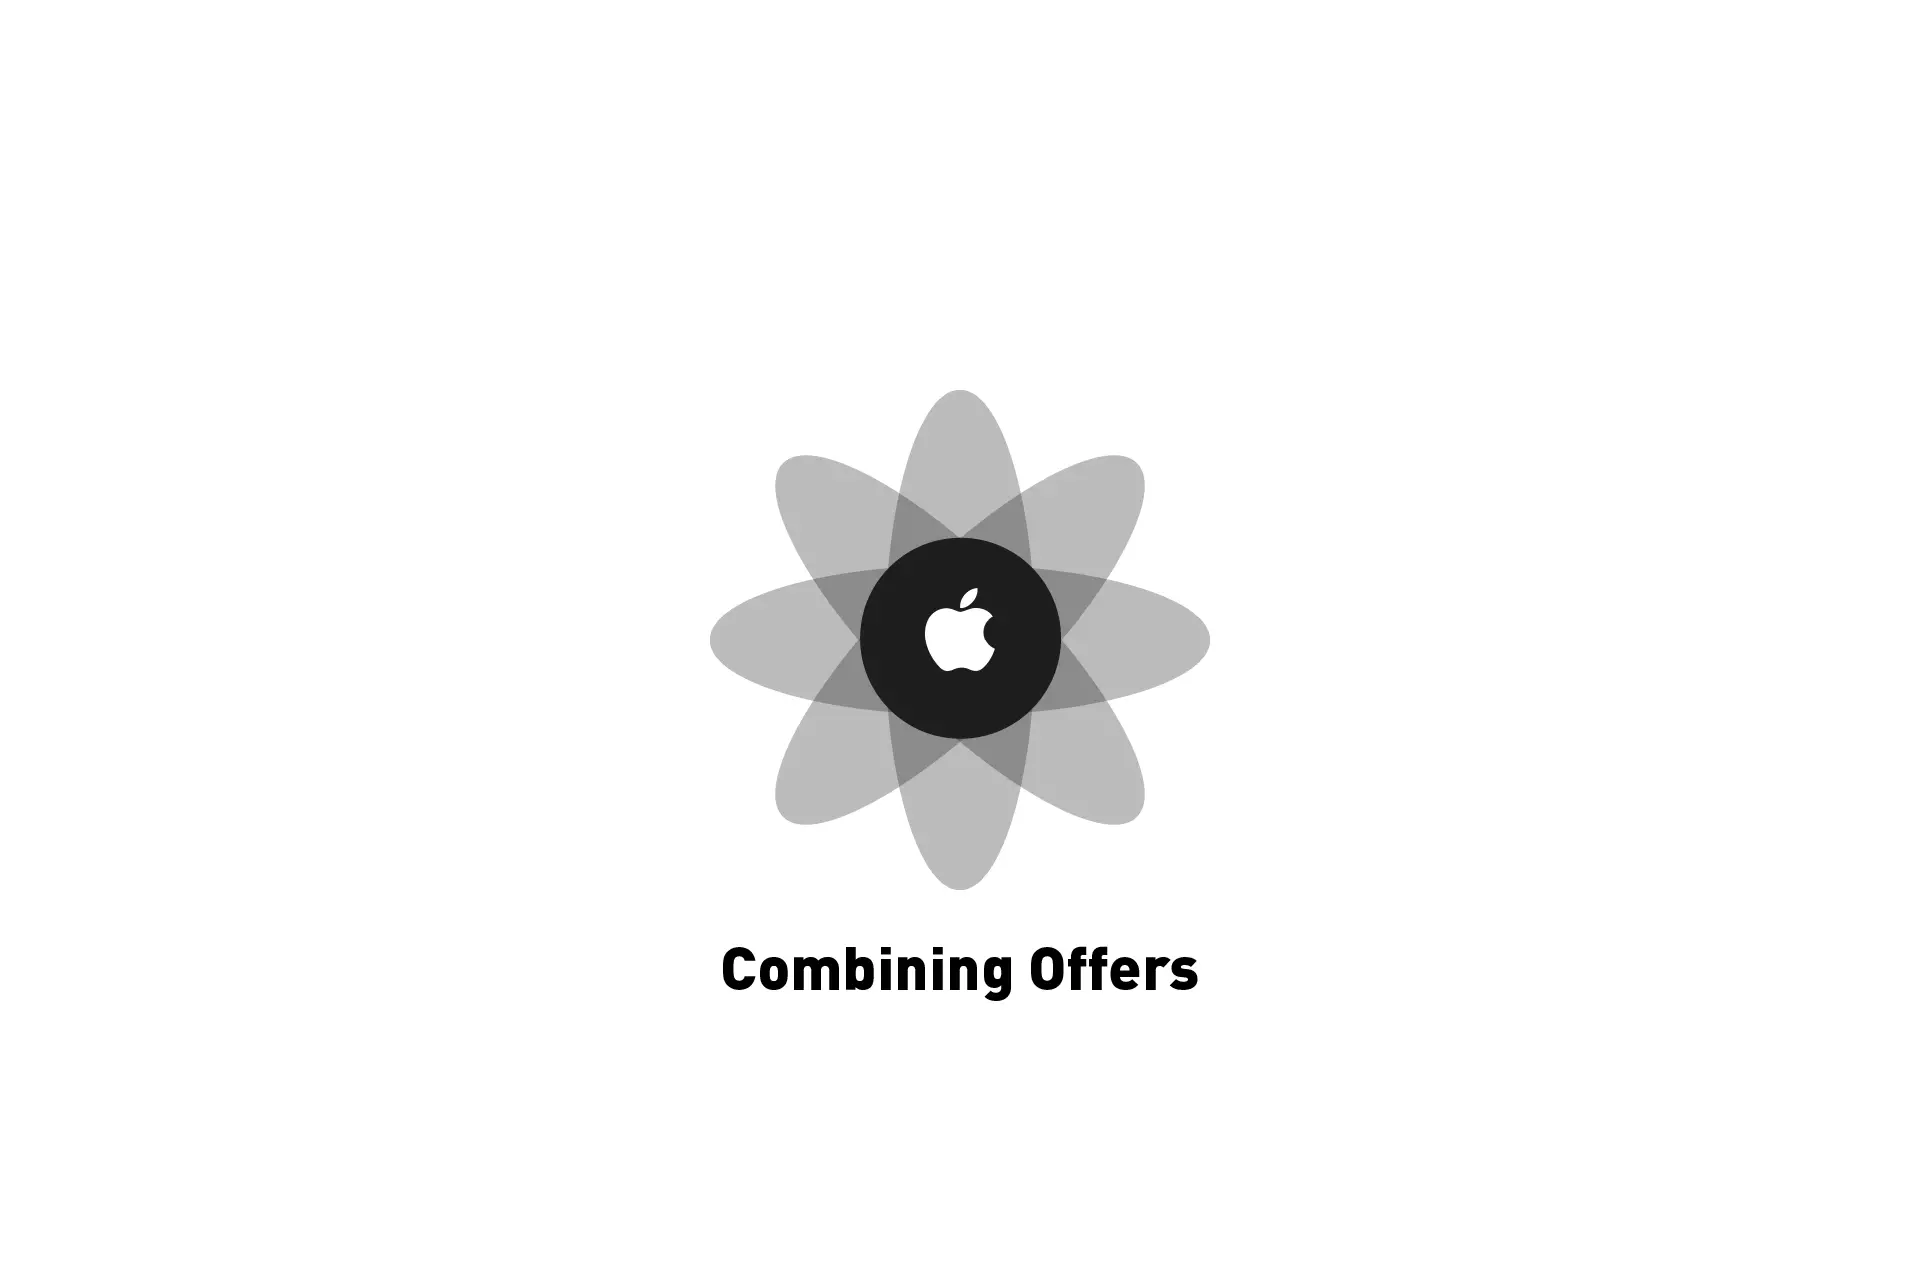 A flower that represents Apple with the text "Combining Offers" beneath it.